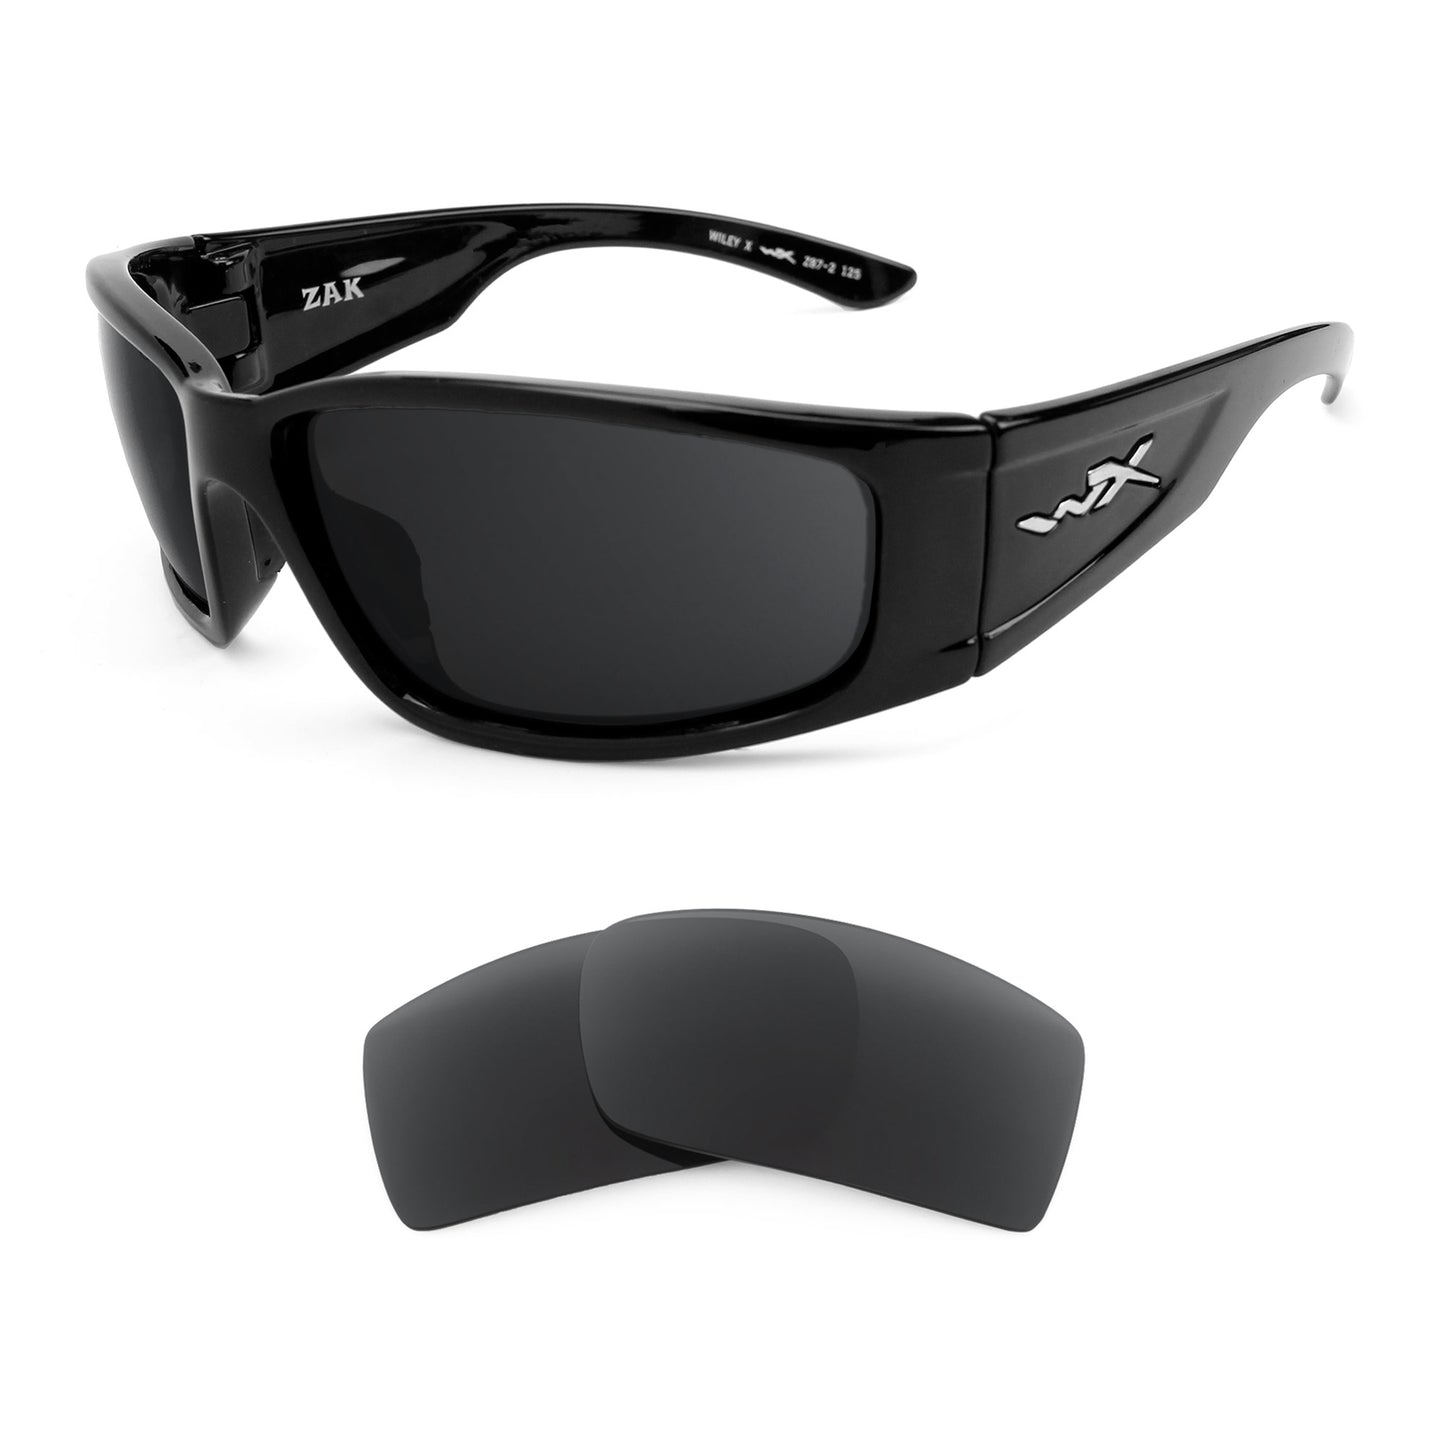 Wiley X Zak sunglasses with replacement lenses